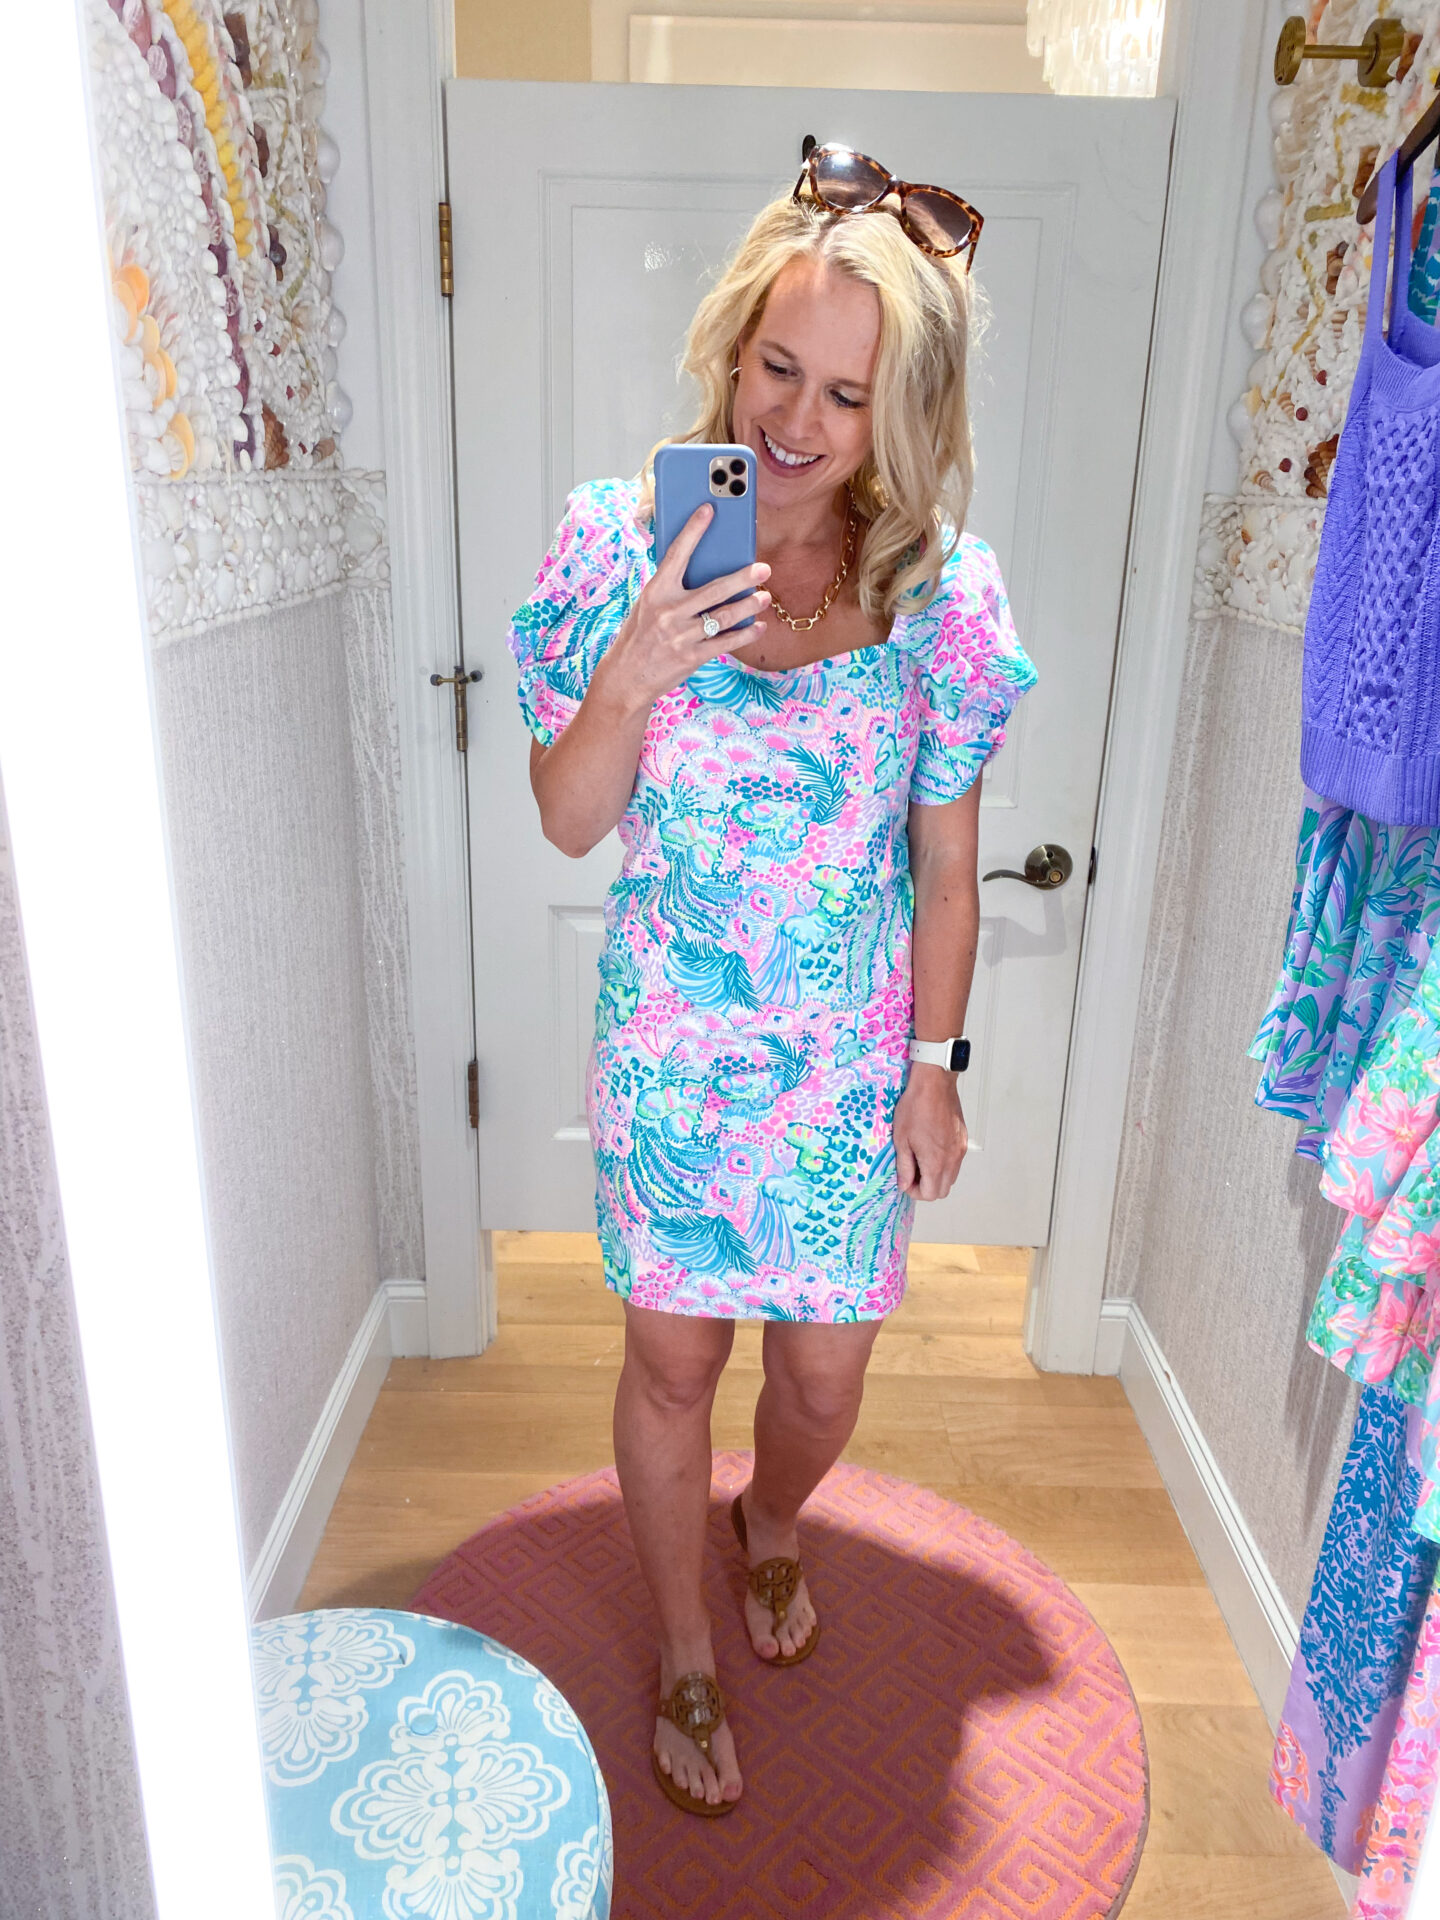 Winter 2023 Lilly Pulitzer Sale | Lilly Pulitzer tips and prices for the Lilly Sunshine Sale